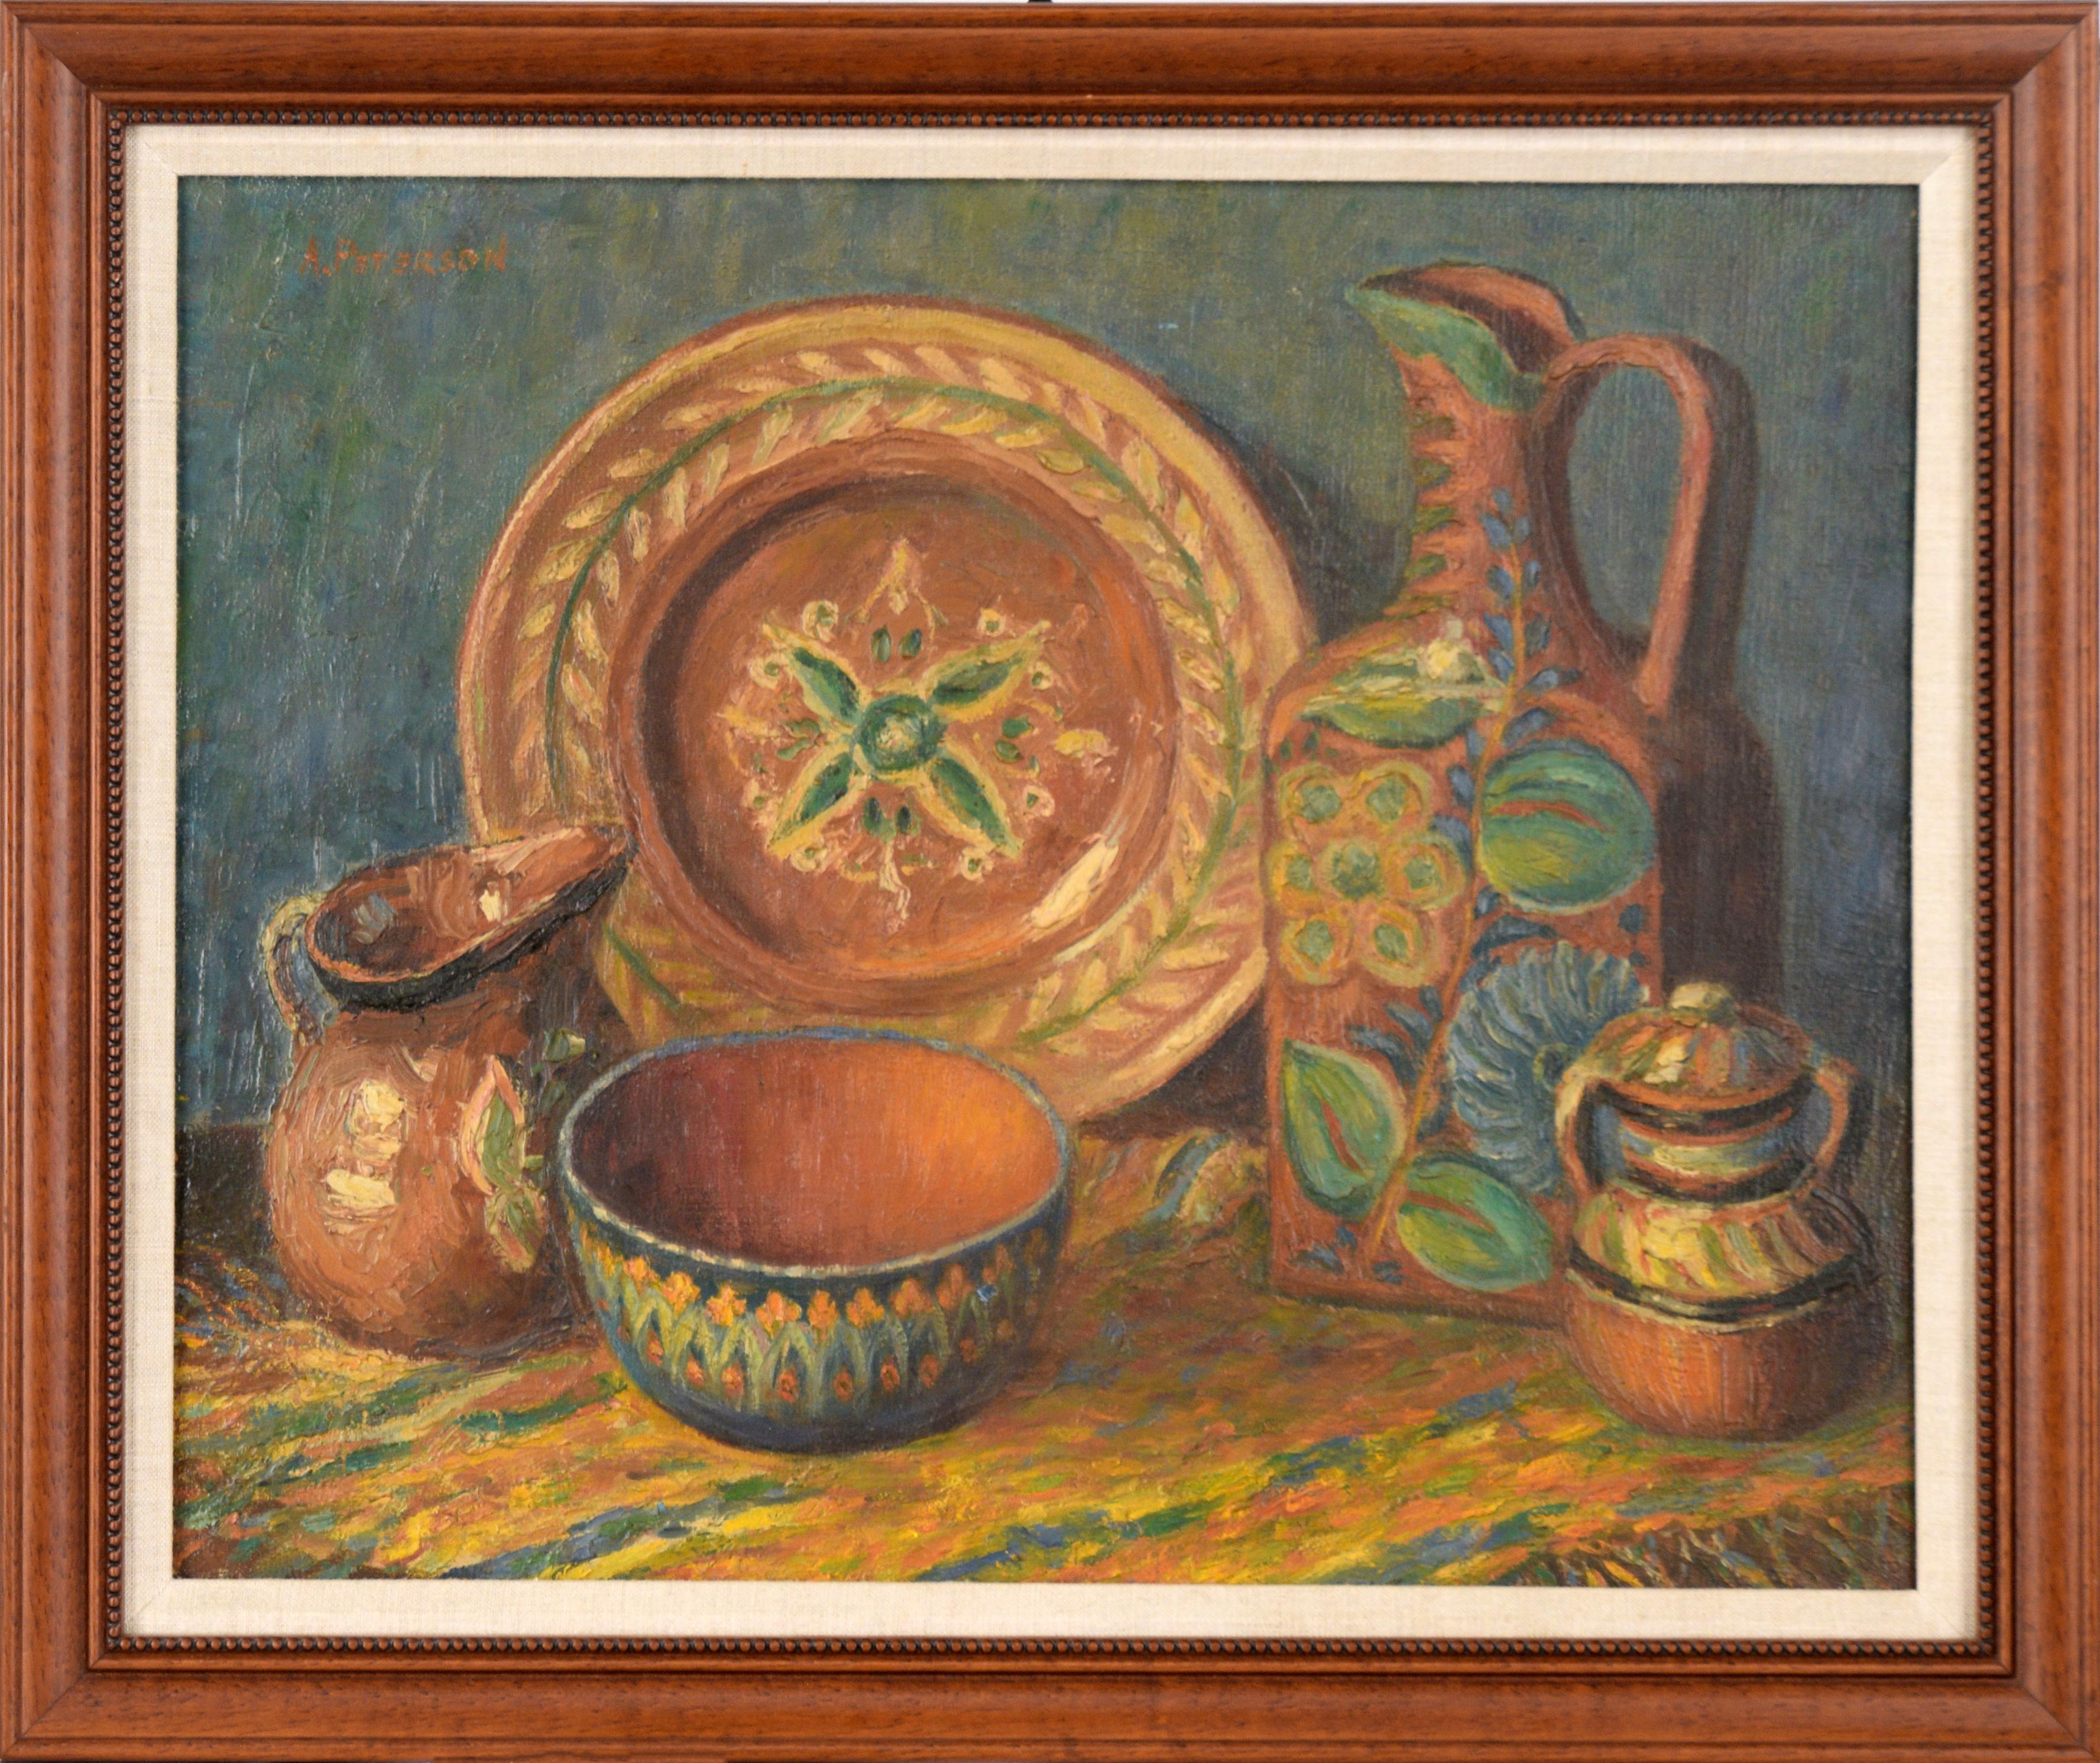 Still Life of Ornate Pottery - Oil on Canvas